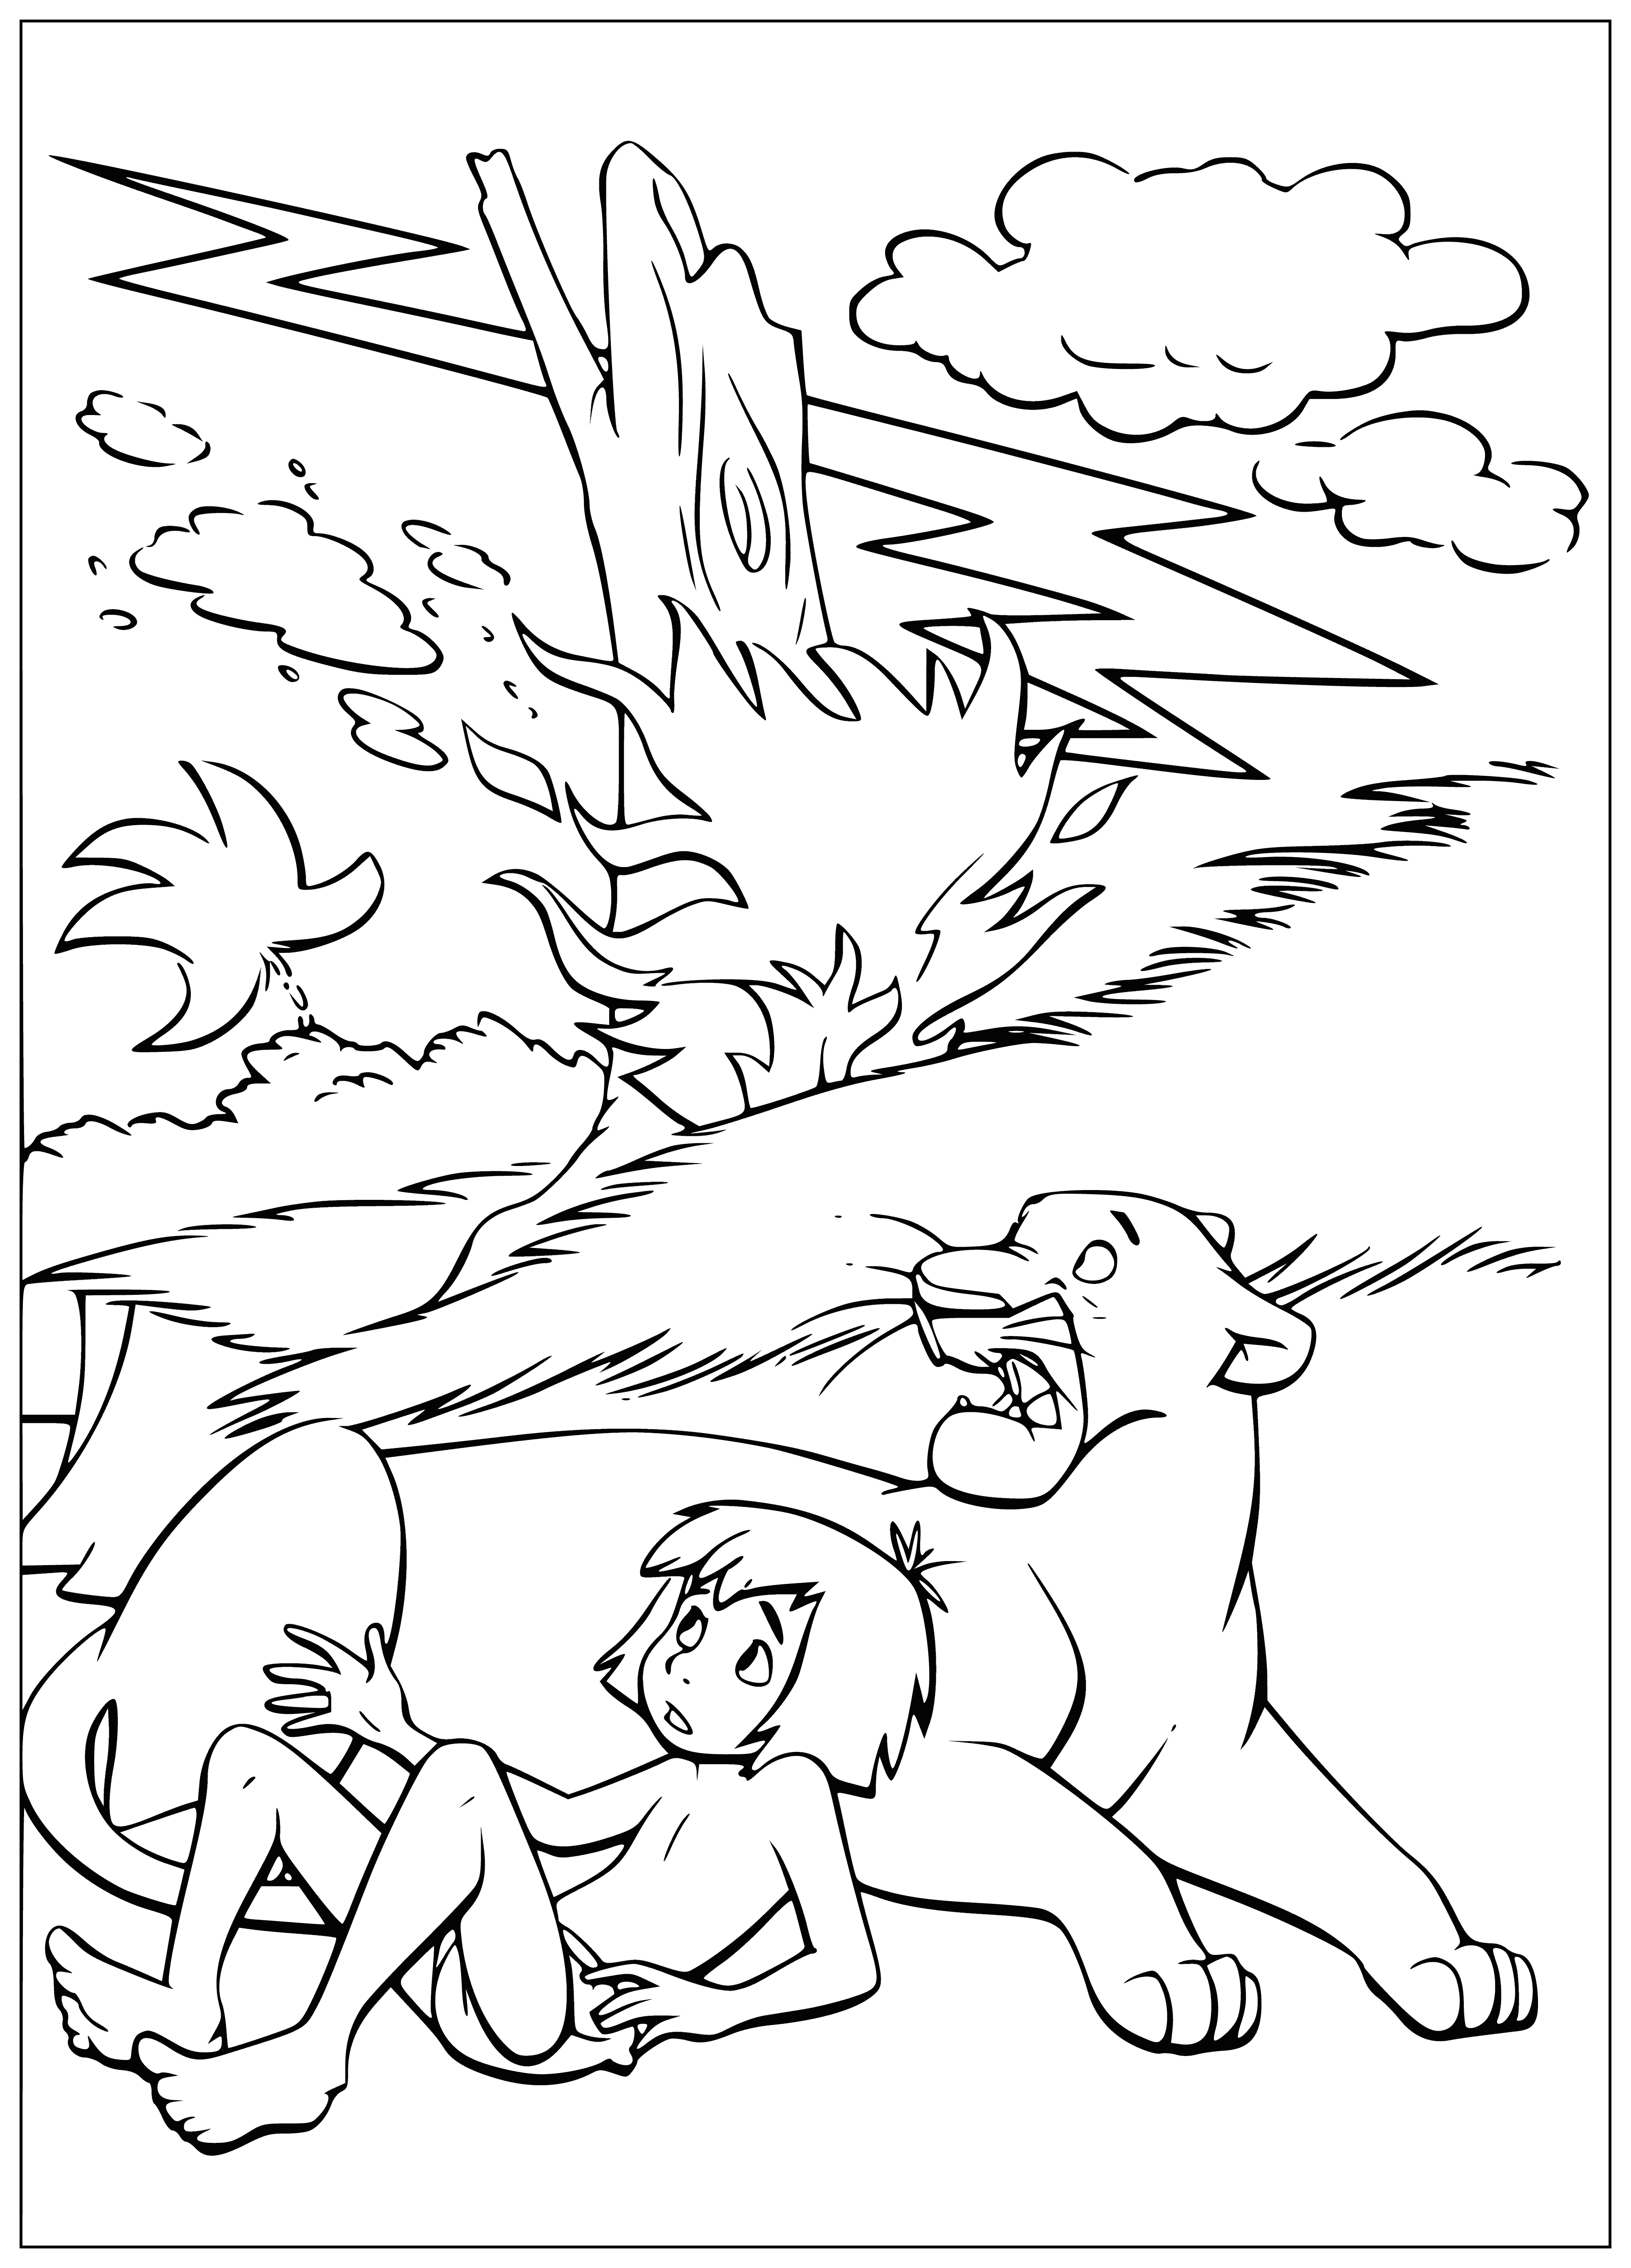 coloring page: Lightning strikes a tree in the jungle, engulfing it in flames, illuminating the surrounding trees and curling smoke into the air.